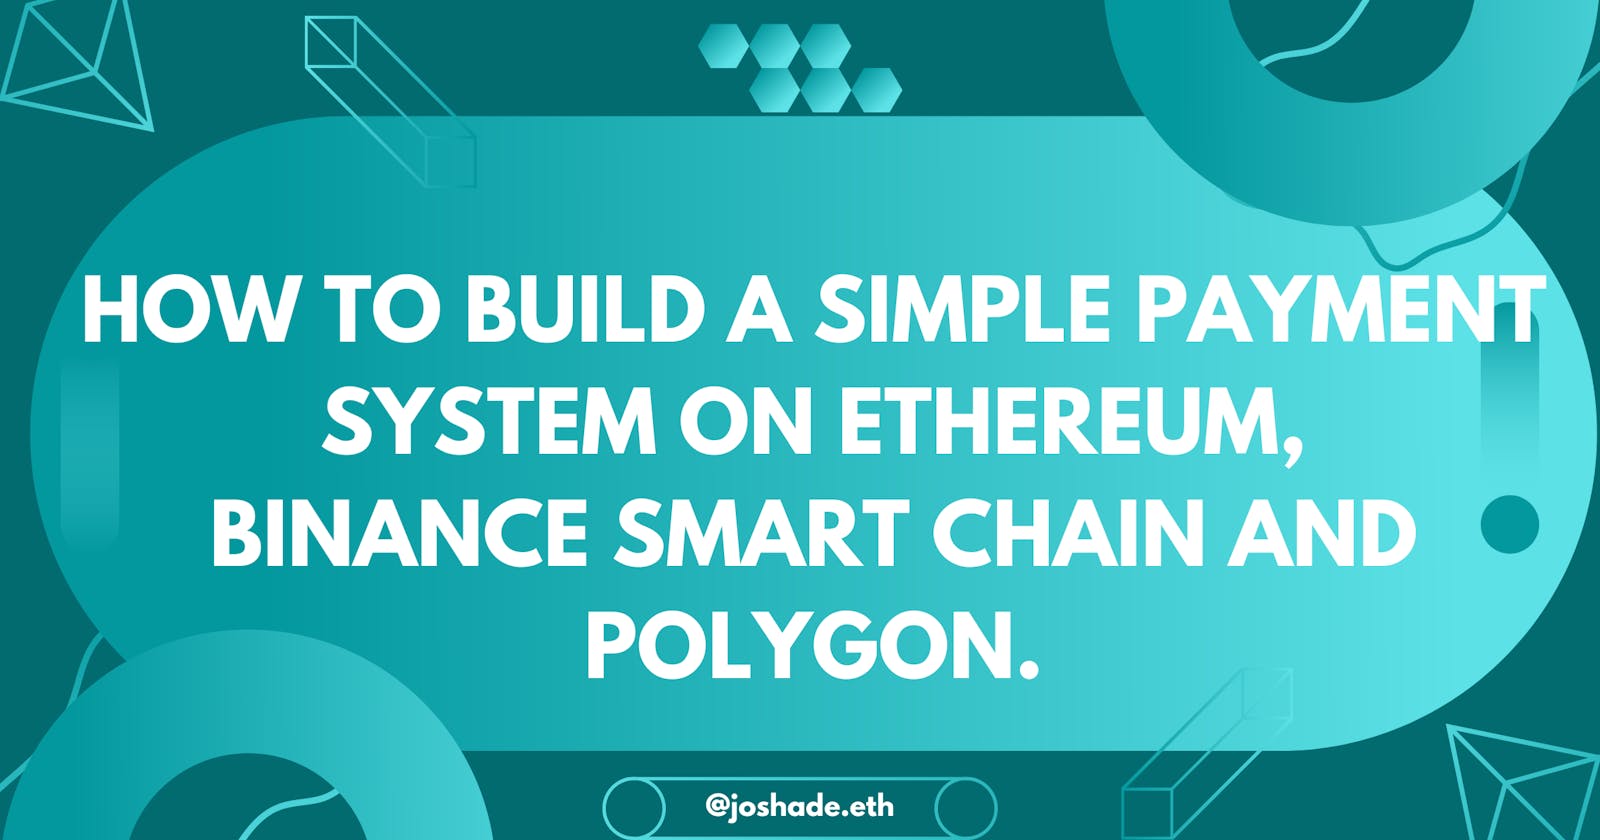 How To Build A Simple Payment System On Ethereum, Binance Smart Chain, And Polygon